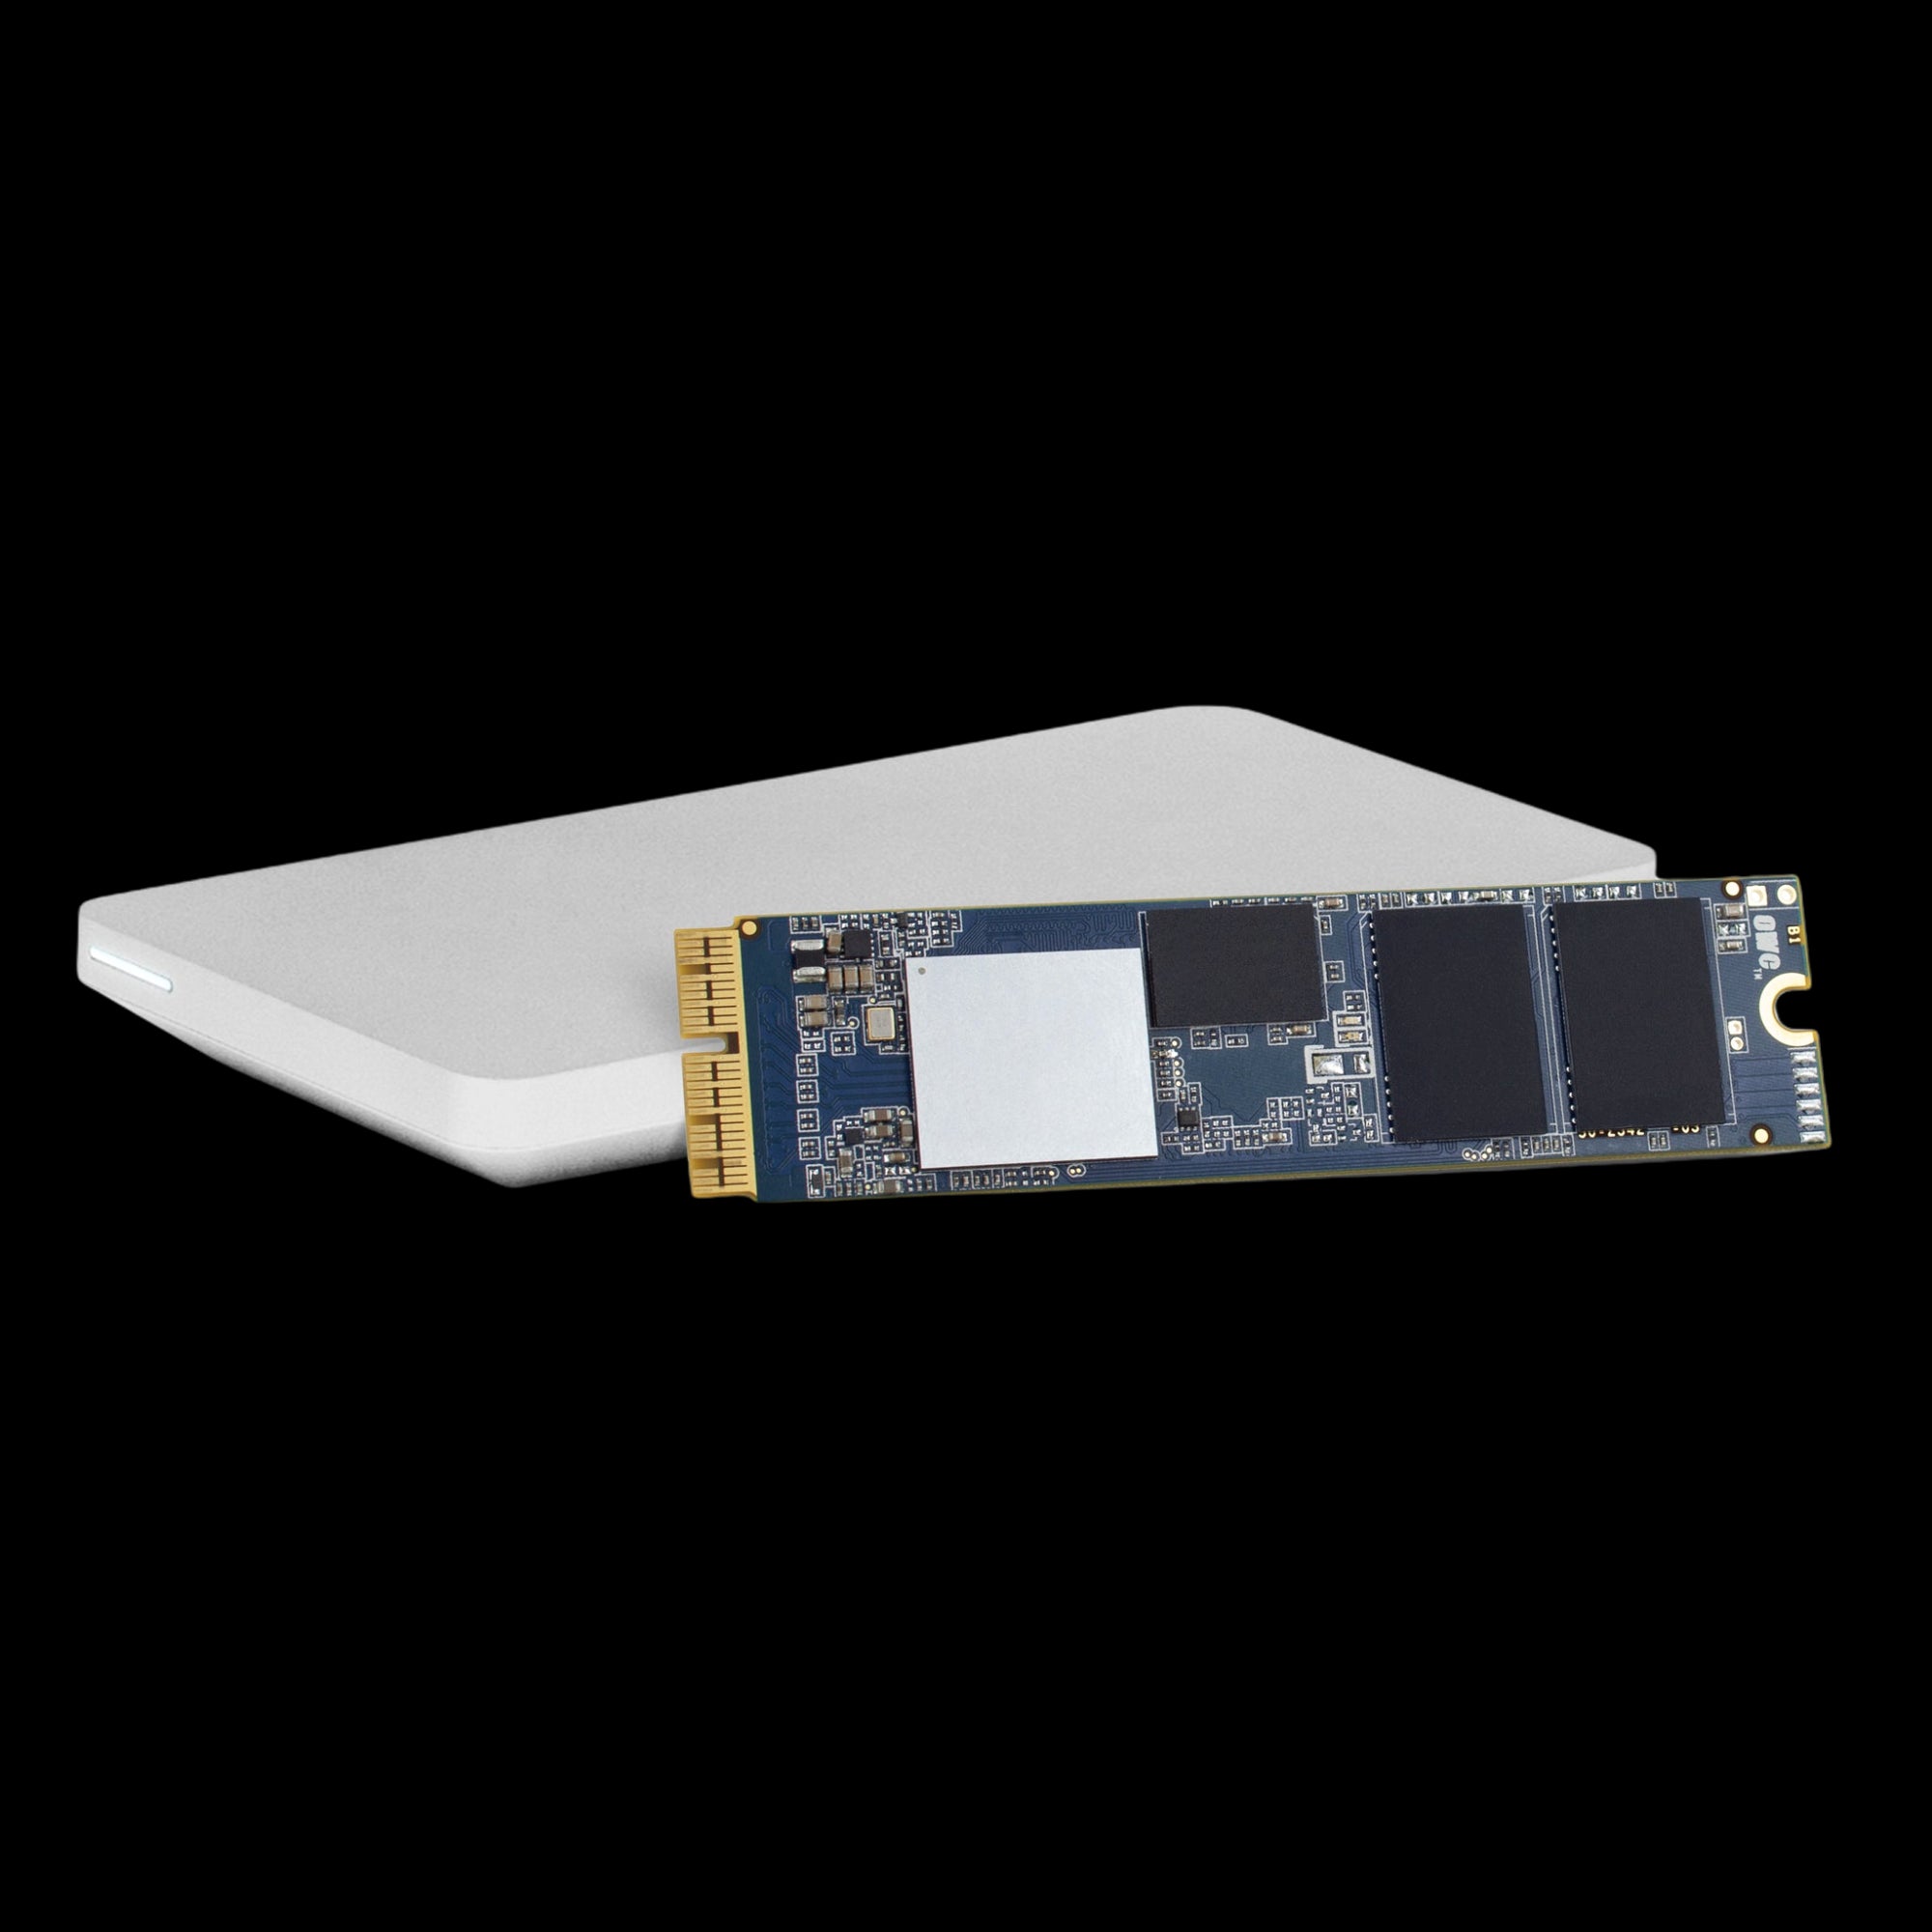 køkken Ved daggry opkald OWC 480GB Aura Pro X2 SSD with Upgrade Kit for Select 2013 and Later  MacBook Air & MacBook Pro | Megamac